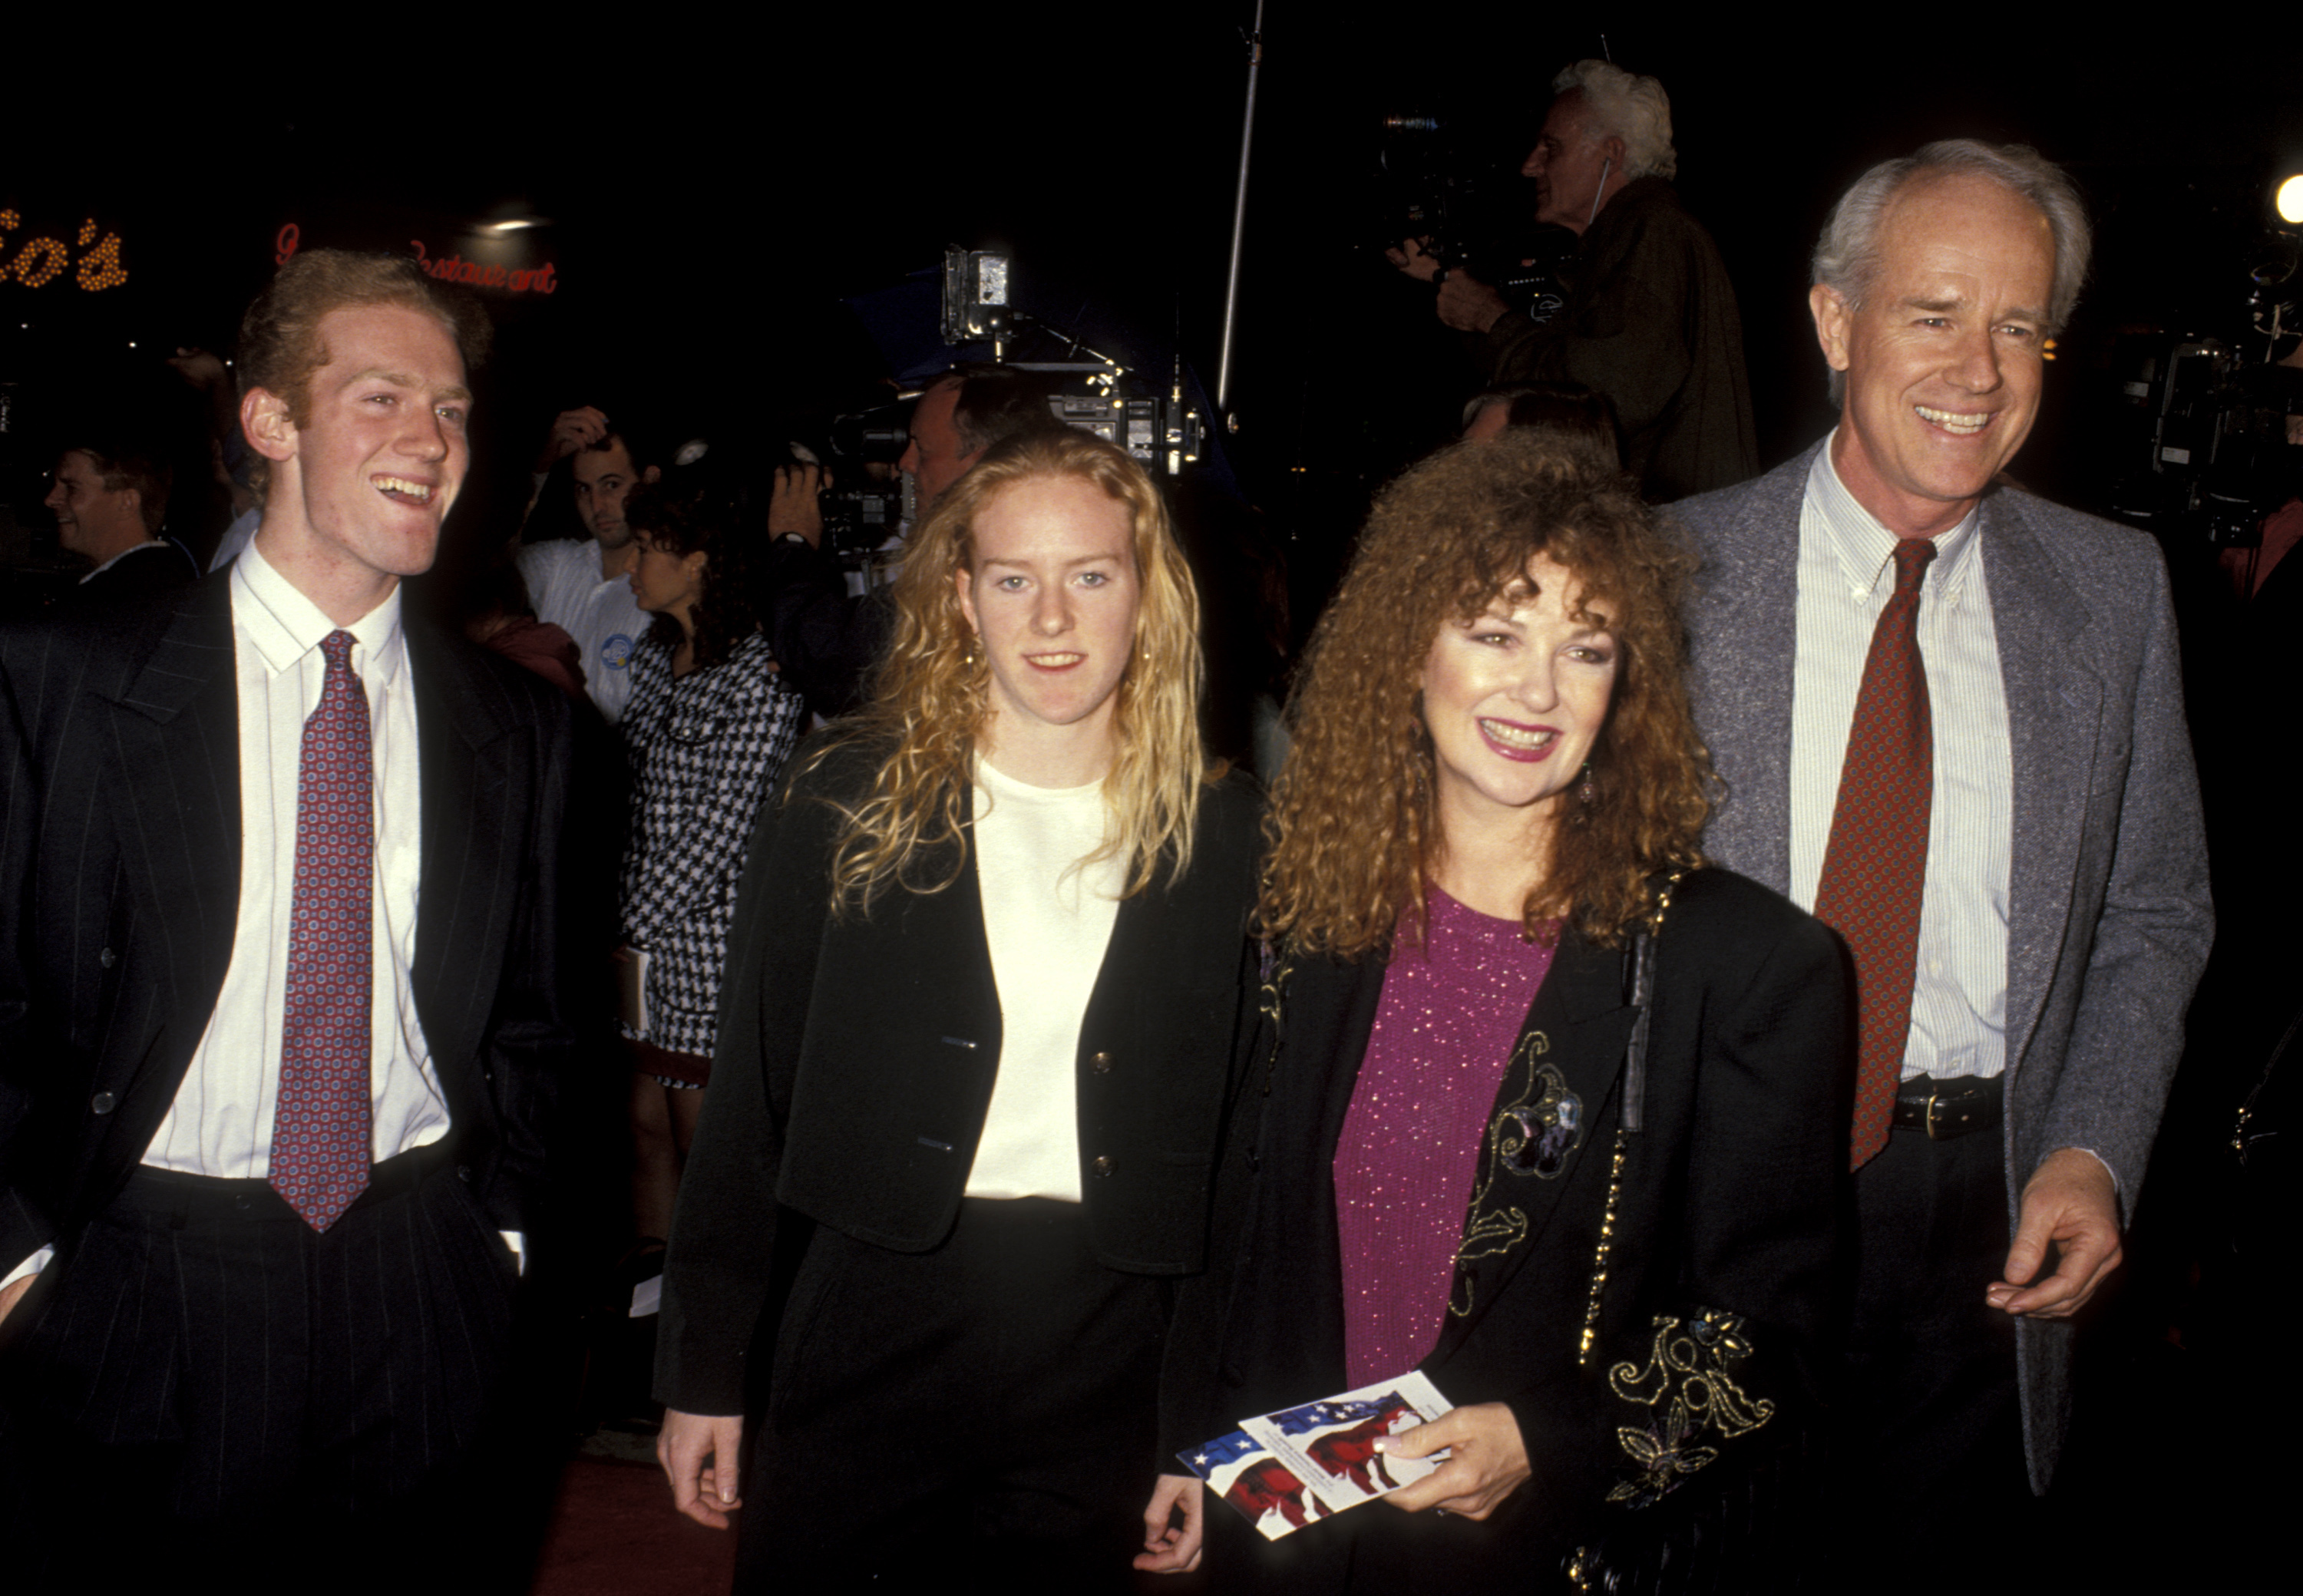 Actress Shelly Fabares with her husband Mike Farrell and his children, Mike Farrell, Jr. and Erin Farrell, during the "JFK" world premiere at Mann's Village Theater on December 17, 1991 in Westwood, California | Source: Getty Images